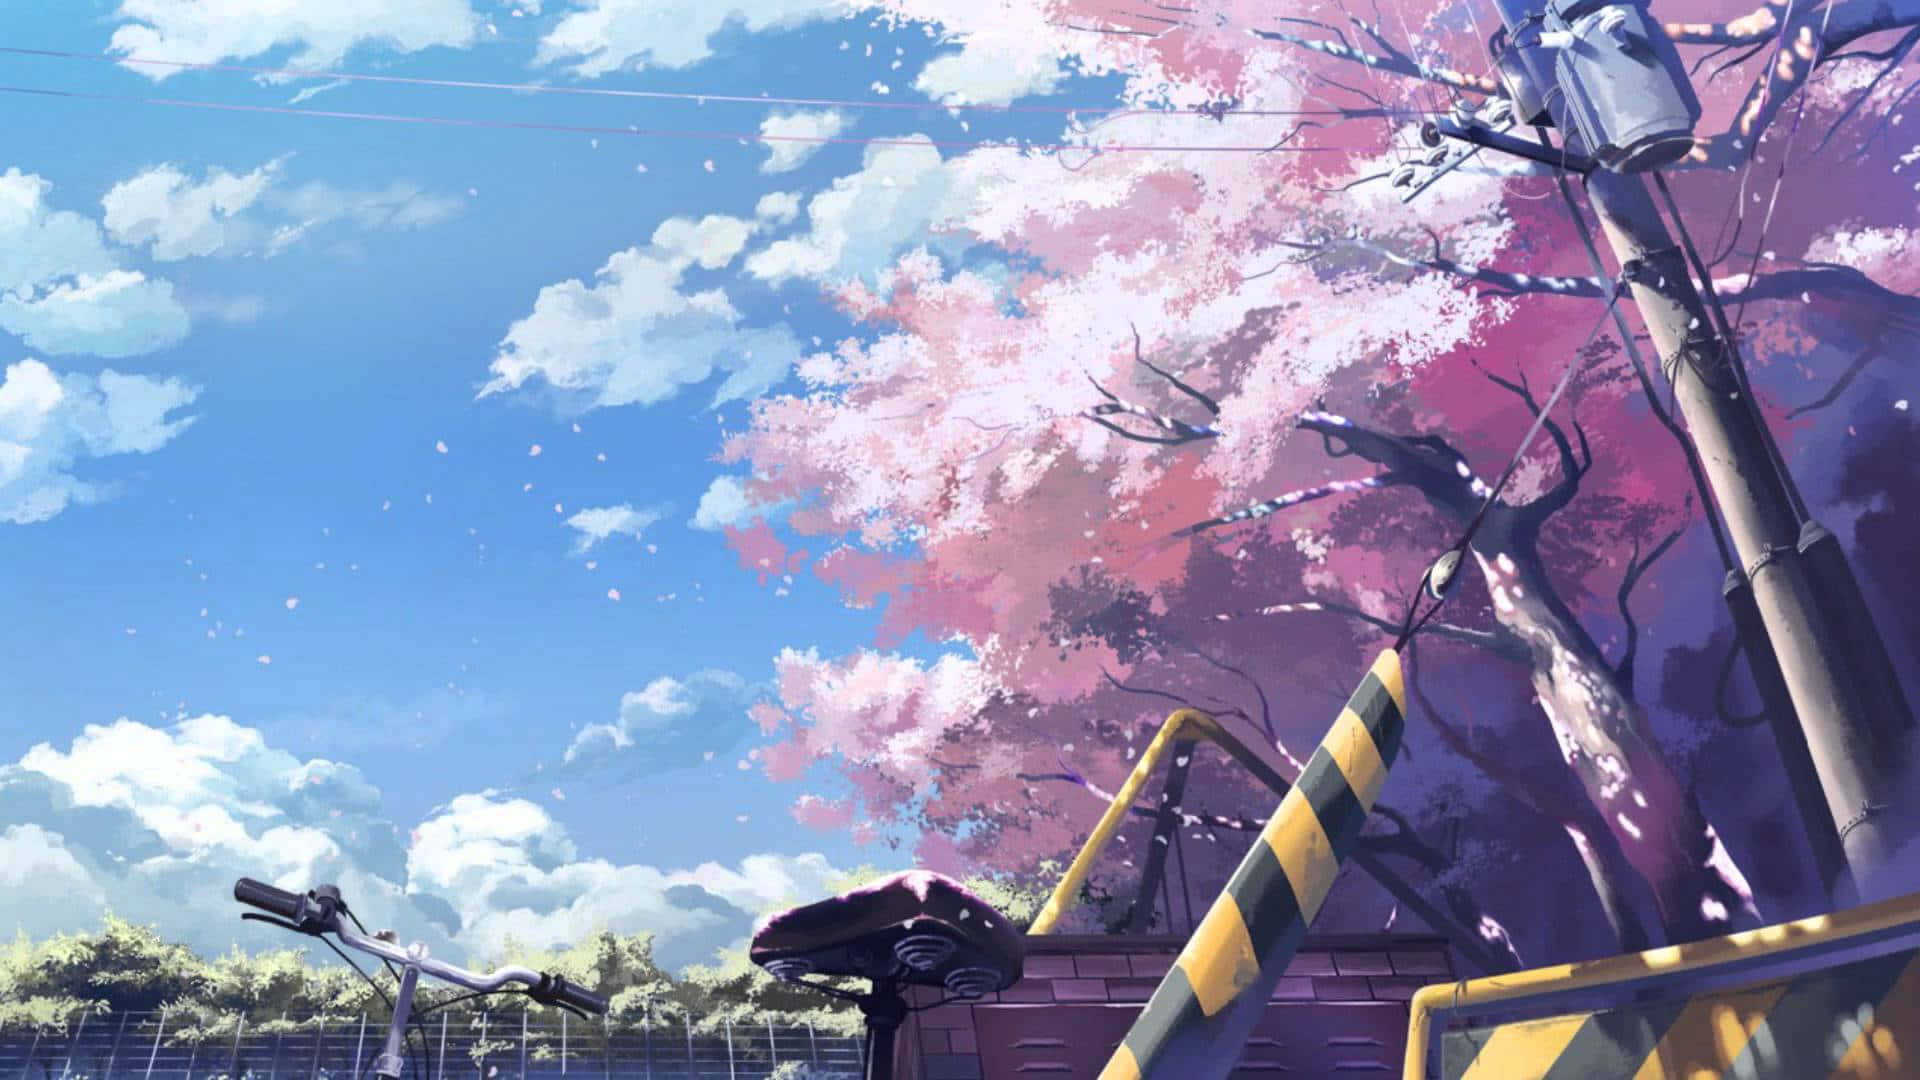 Download Cherry Blossoms Anime Scenery Wallpaper 